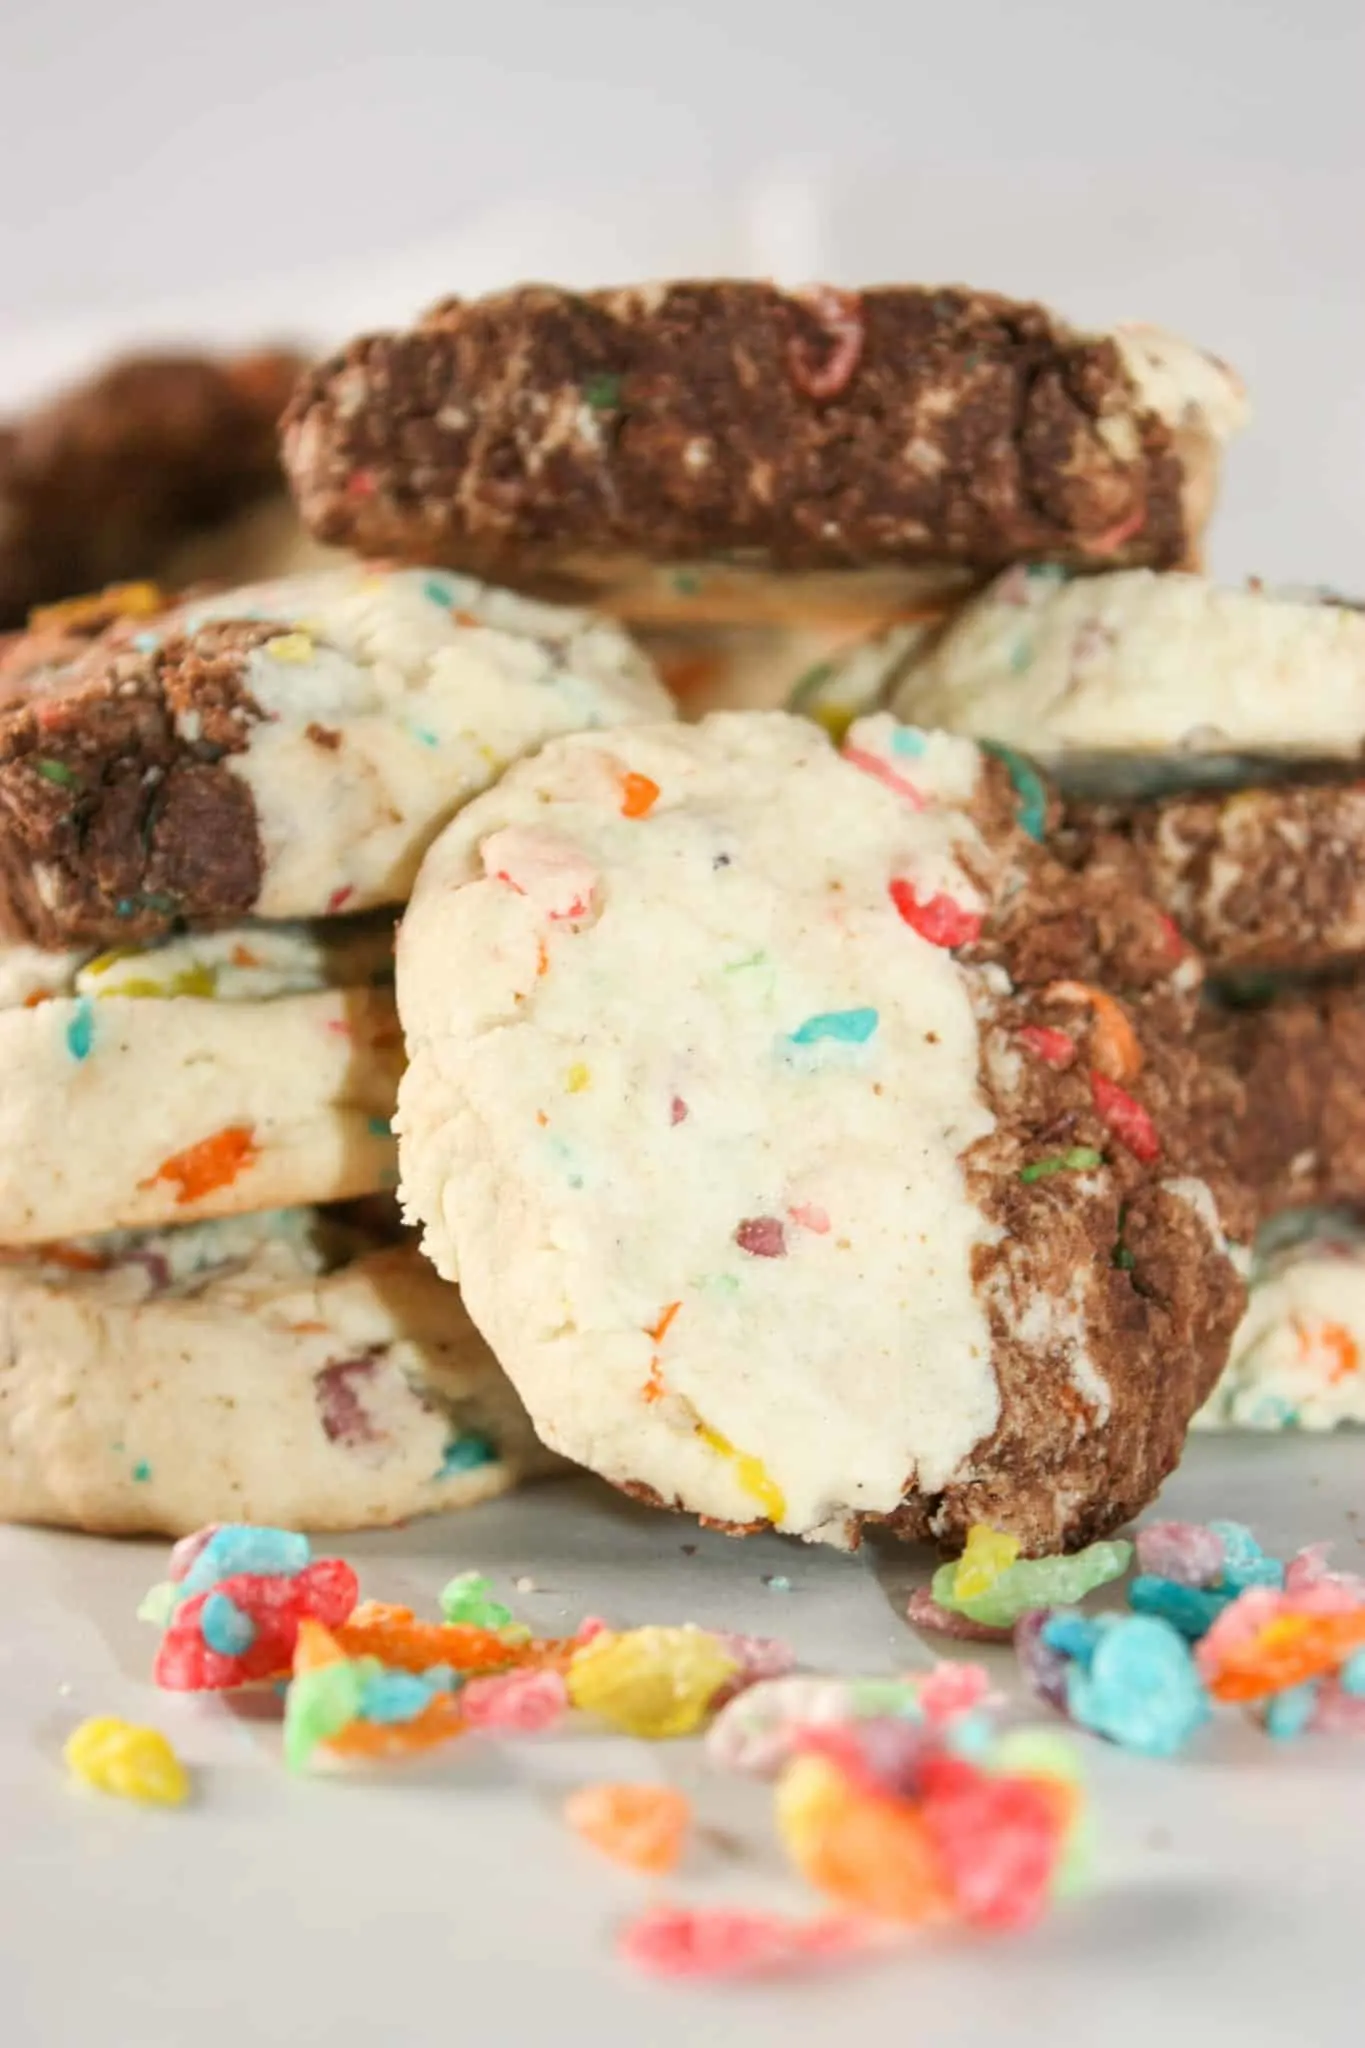 Fruity Pebbles Cookies are a nice colourful snack.  This easy, gluten free recipe will be sure to please the palates of both young and old alike!